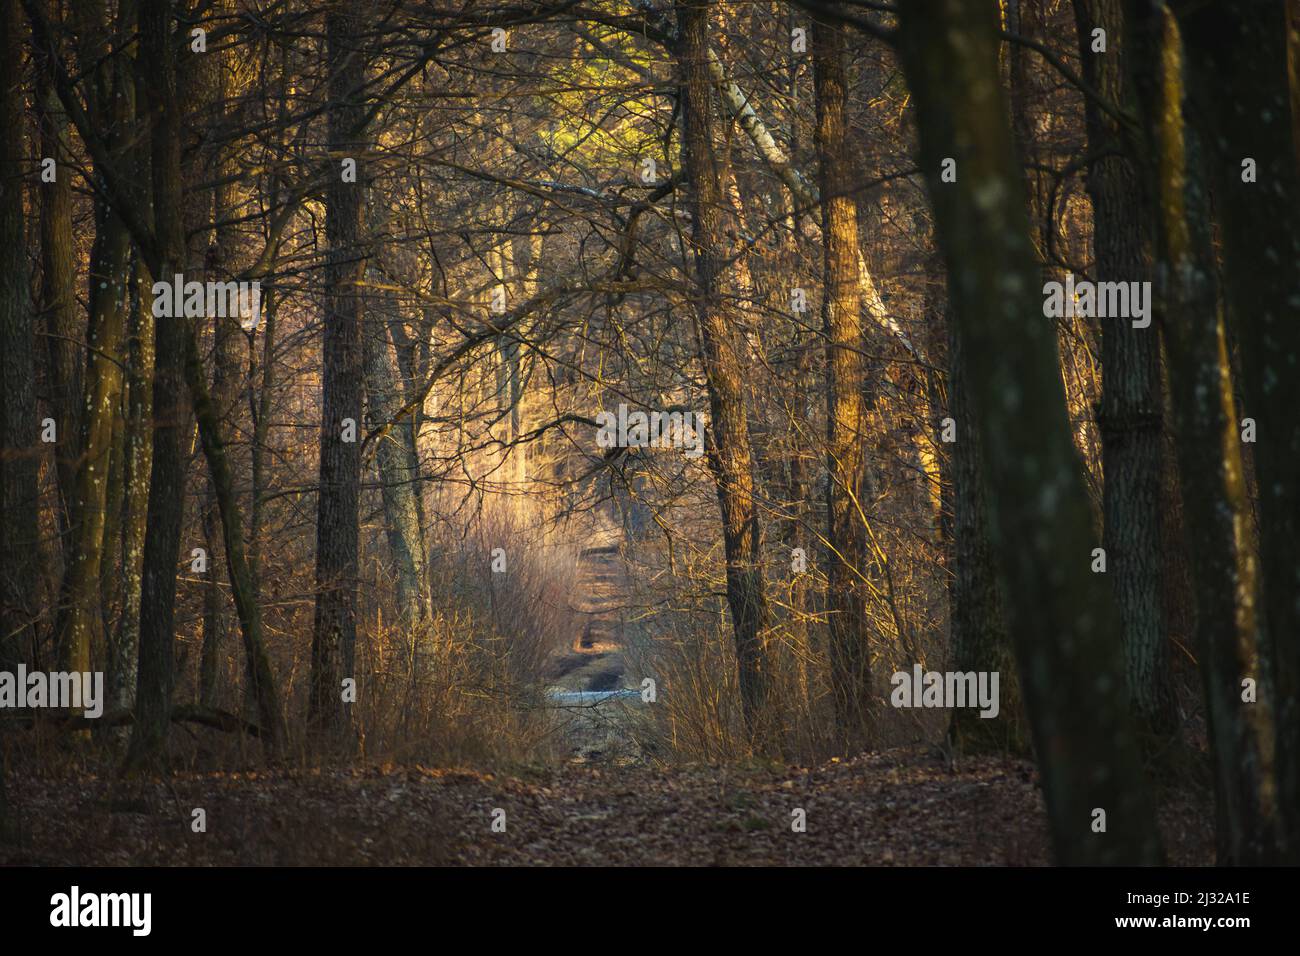 An alley in a creepy and dark forest, March day. Stock Photo